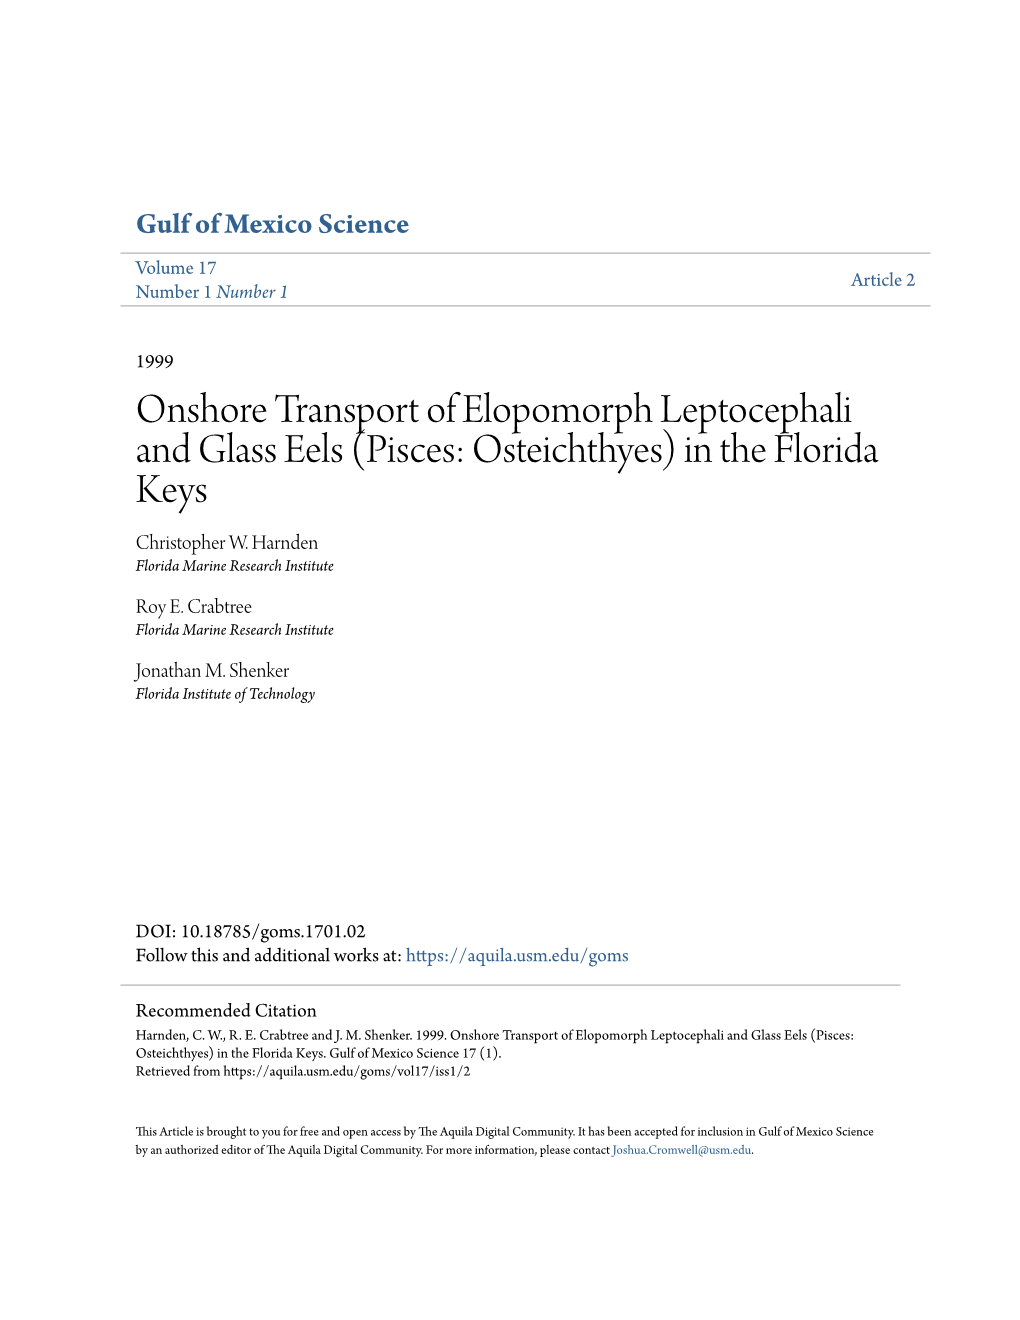 Onshore Transport of Elopomorph Leptocephali and Glass Eels (Pisces: Osteichthyes) in the Florida Keys Christopher W